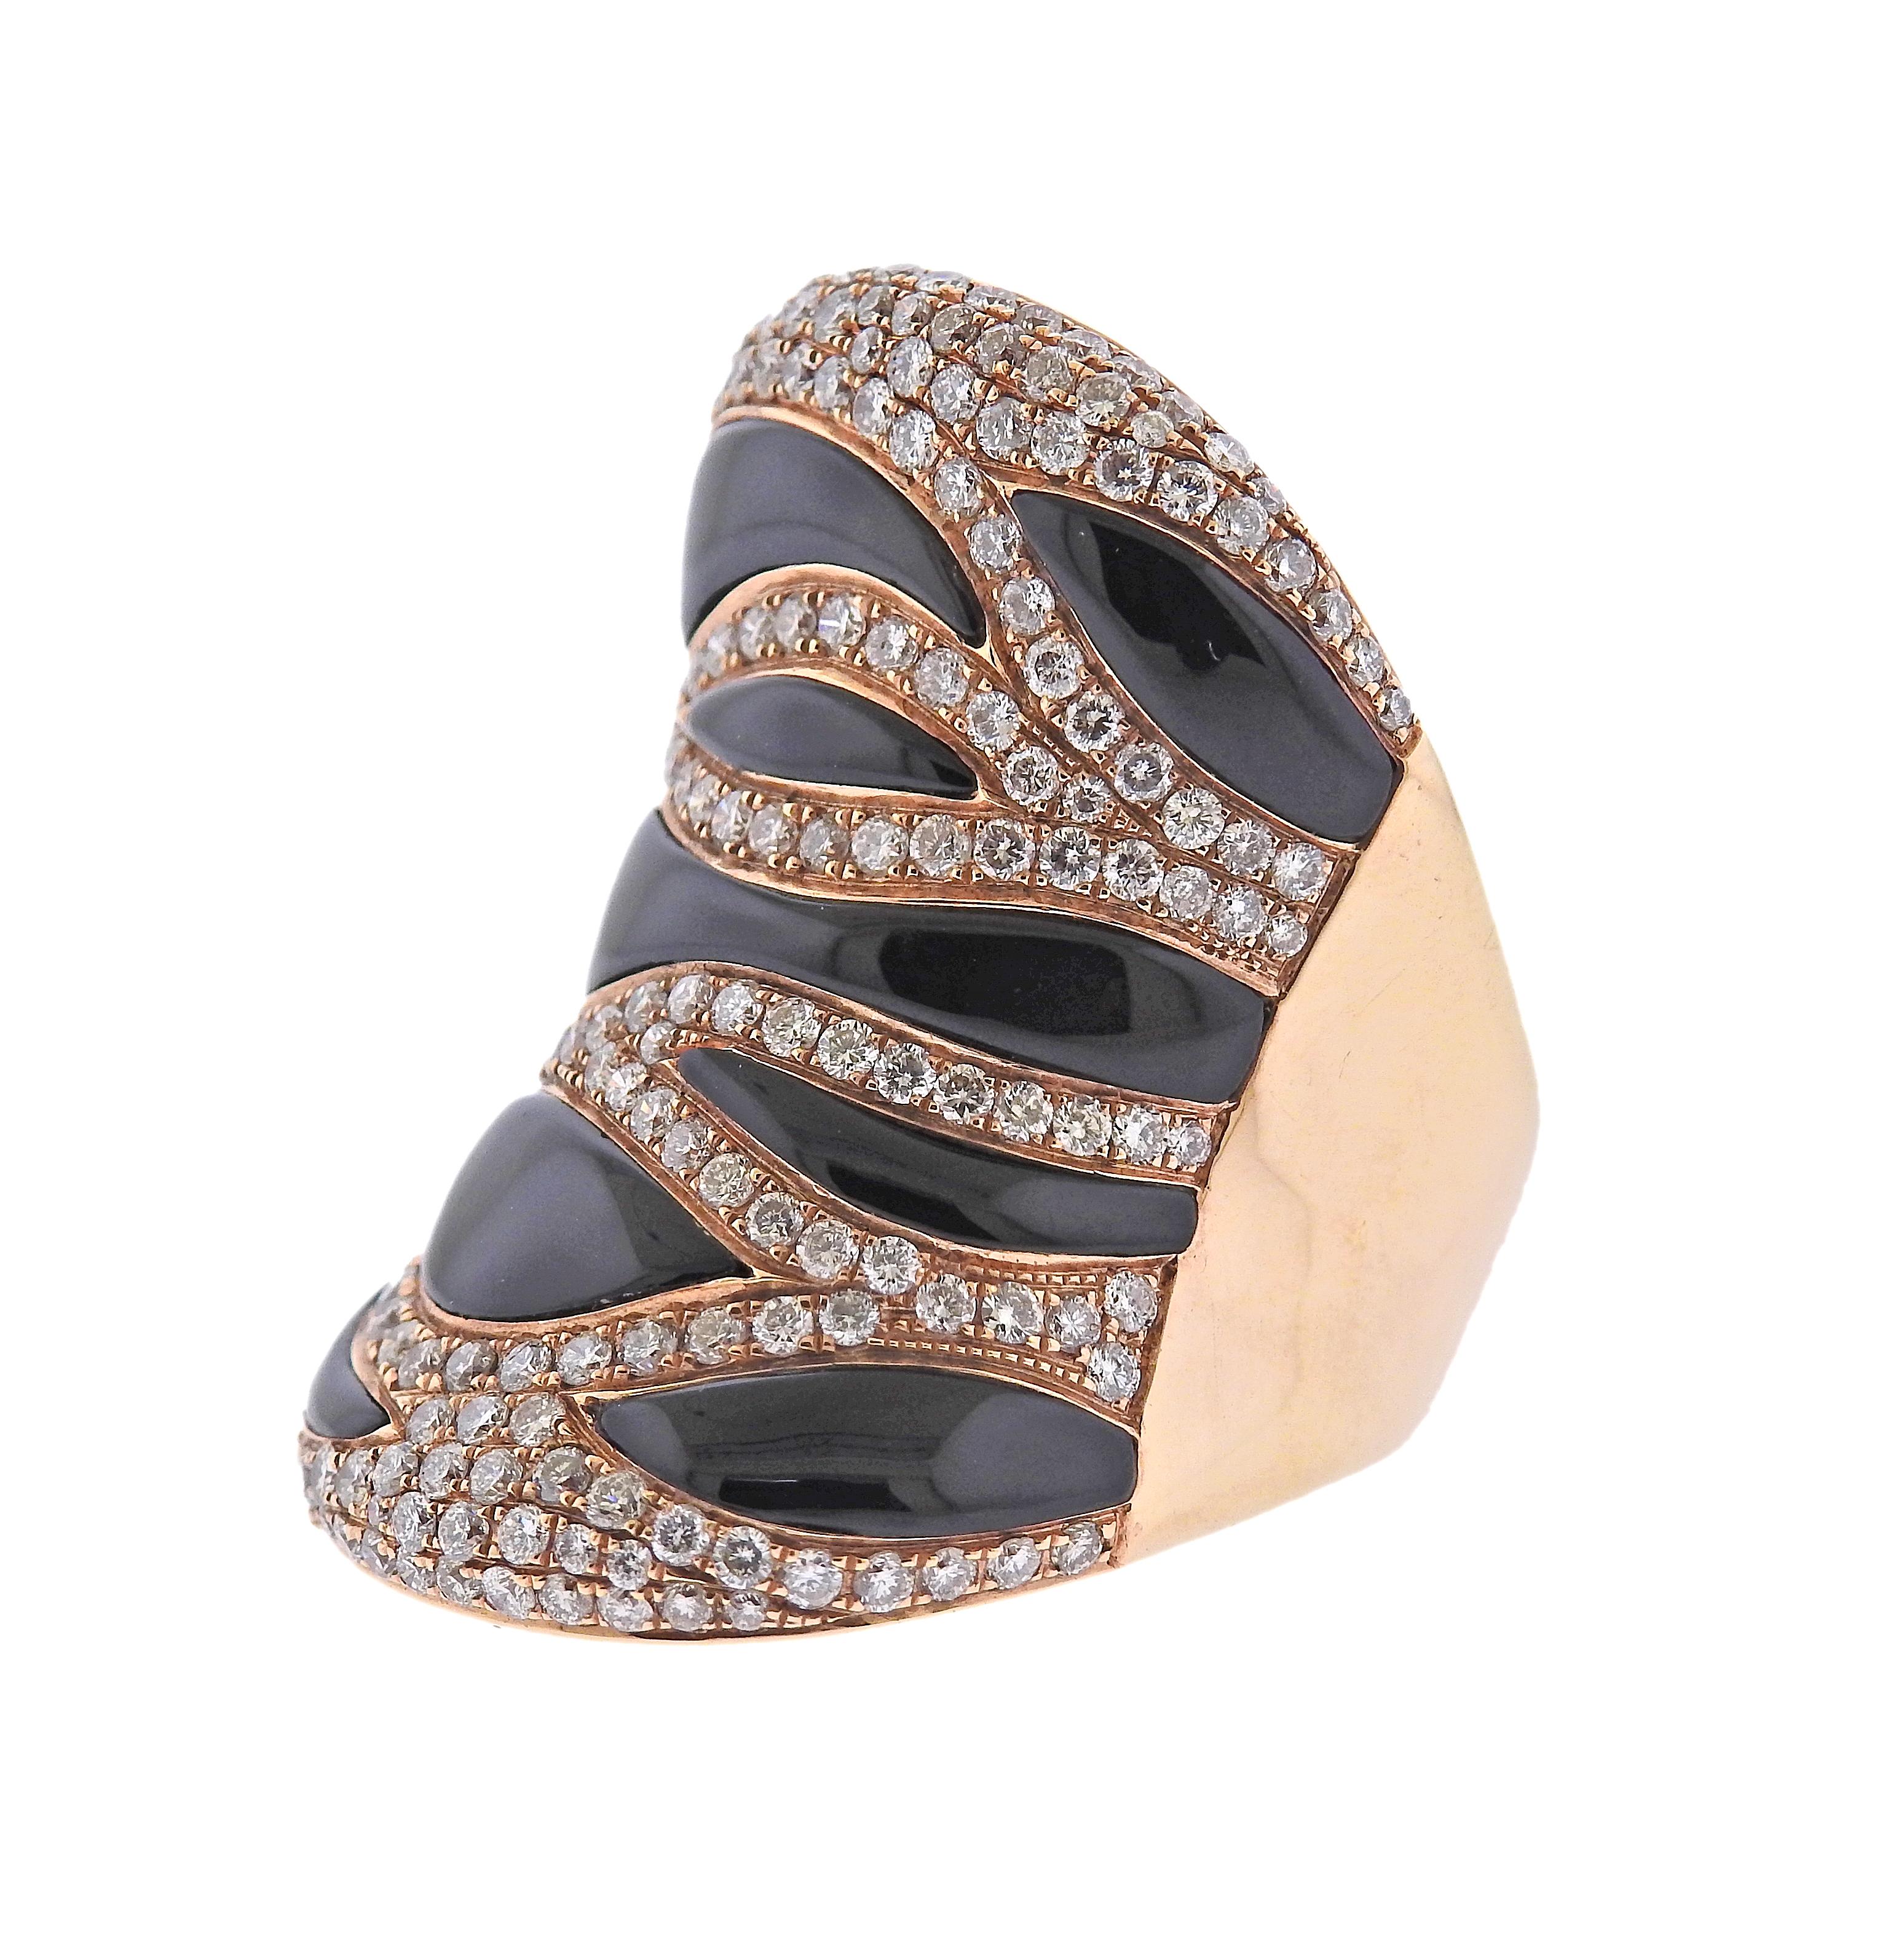 Modern 18k rose gold wide ring, featuring zebra stripes design, set with black onyx and approx. 1.60ctw in H/VS diamonds. Ring size 7, ring top is 35mm wide. Marked 750. Weight - 22.4 grams.